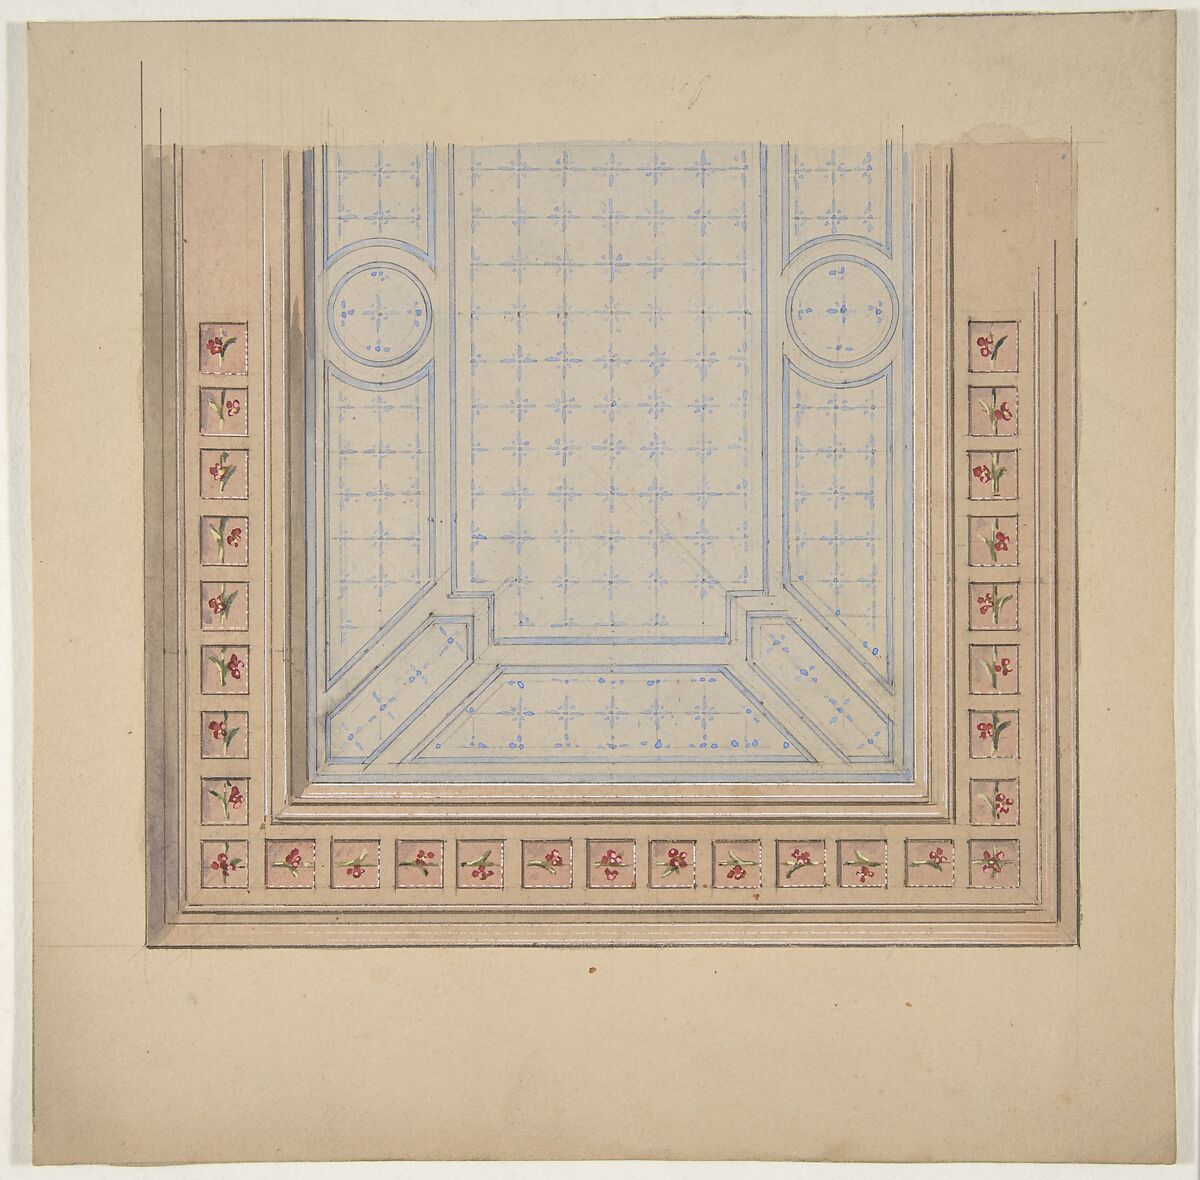 Partial design for ceiling with a border of flowers, Jules-Edmond-Charles Lachaise (French, died 1897), graphite, pen and ink, watercolor, and gouache on wove paper 